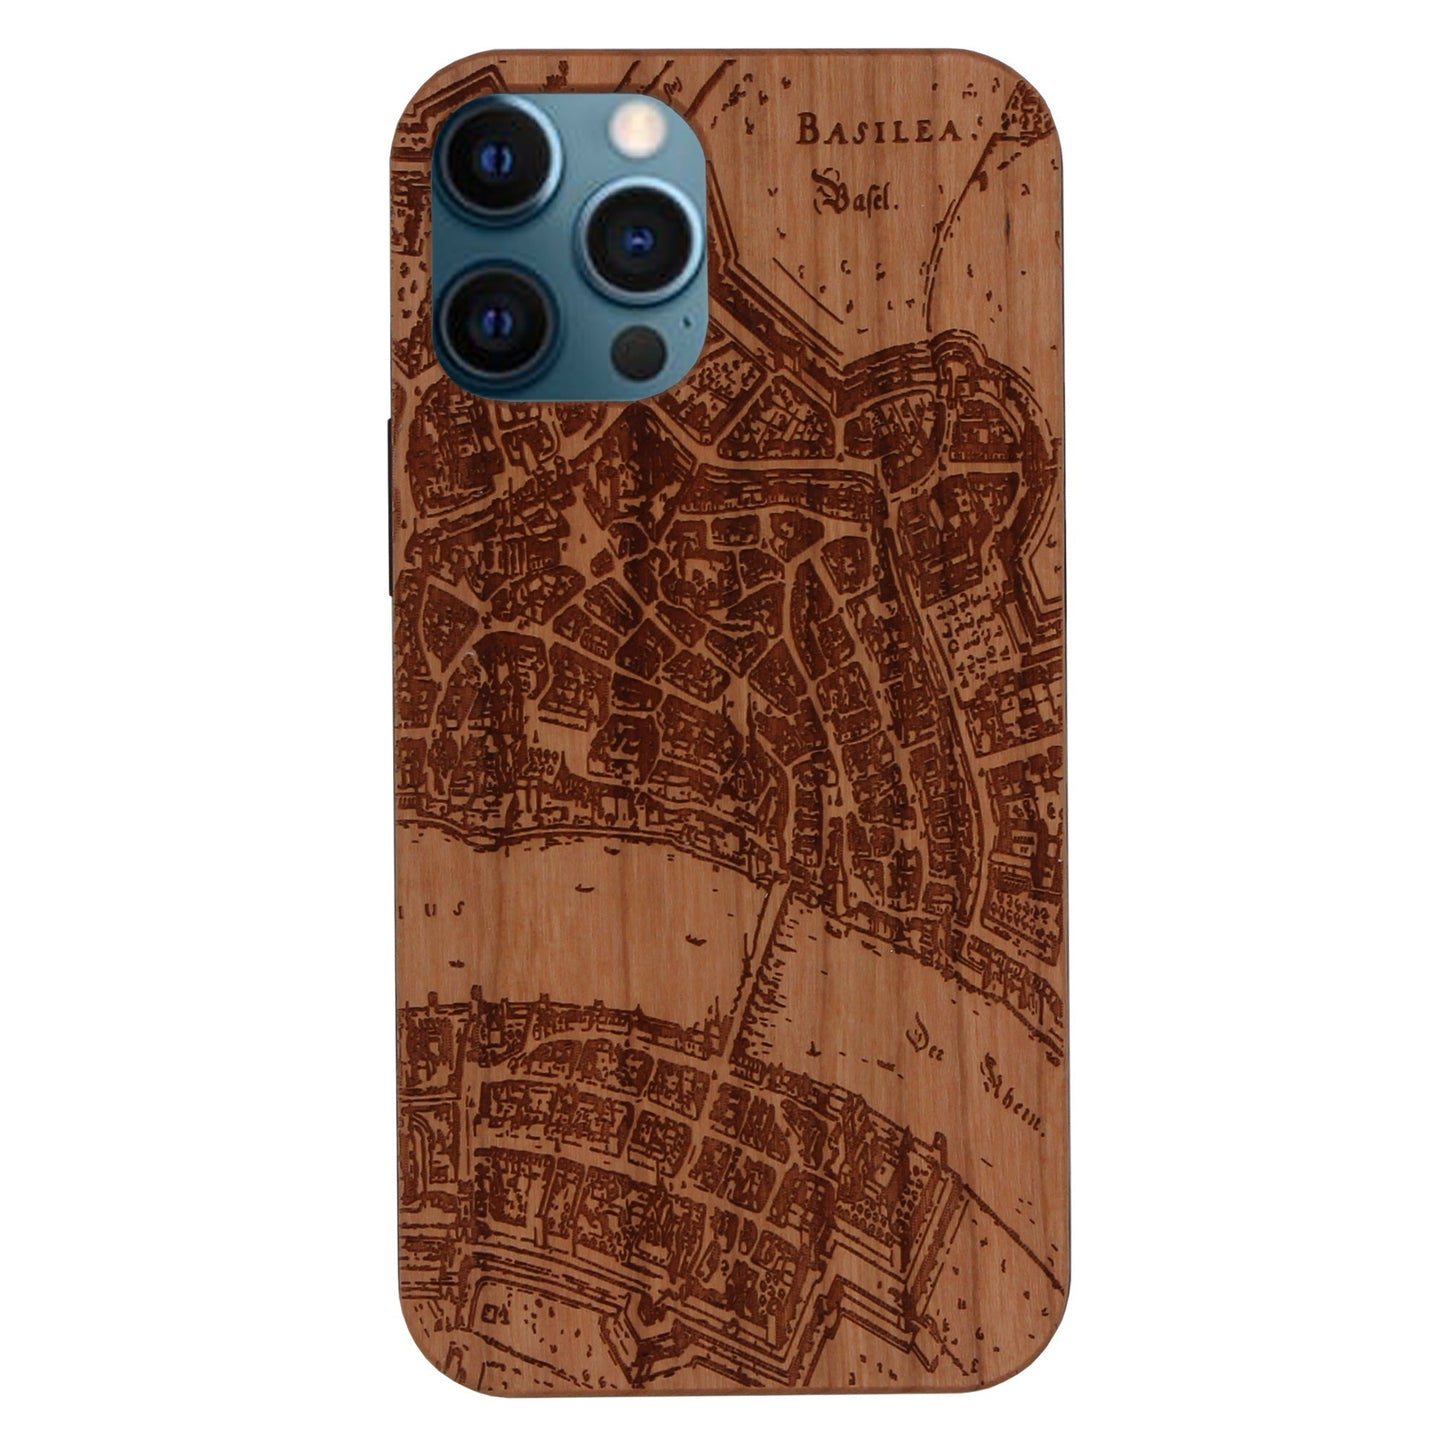 Basel Merian Eden case made of cherry wood for iPhone 12/12 Pro